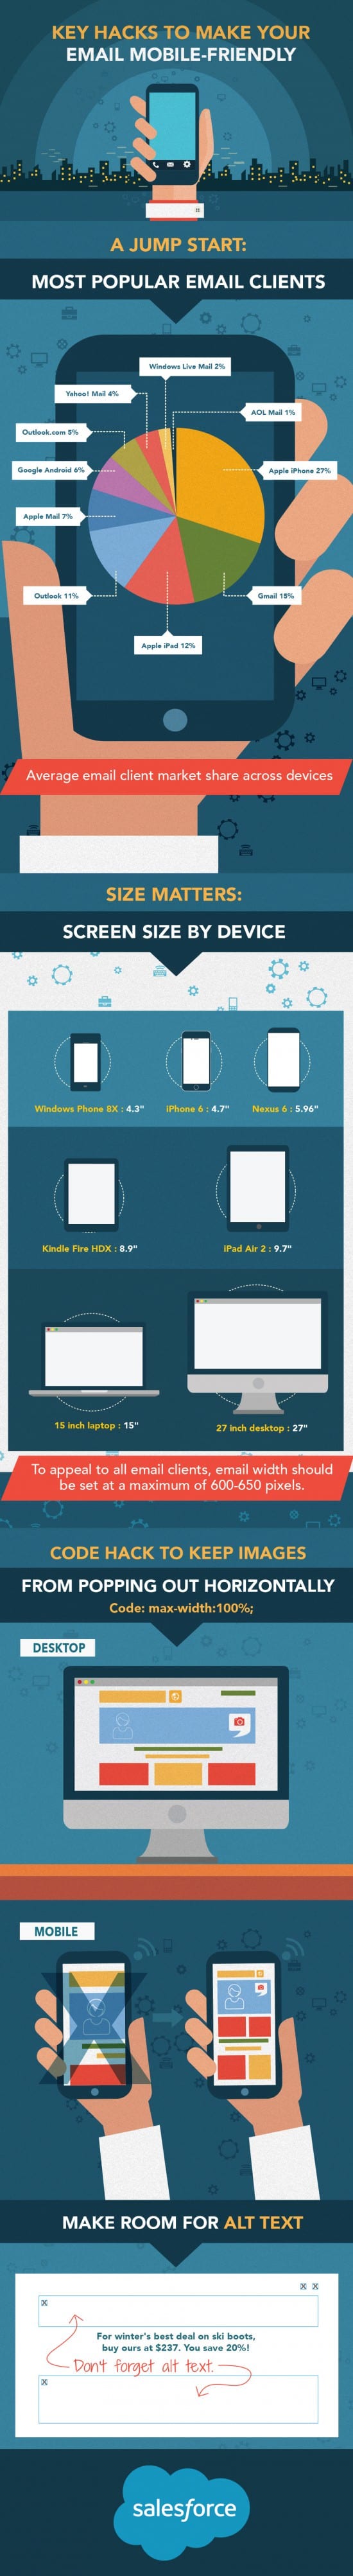 18 email hacks  infographic